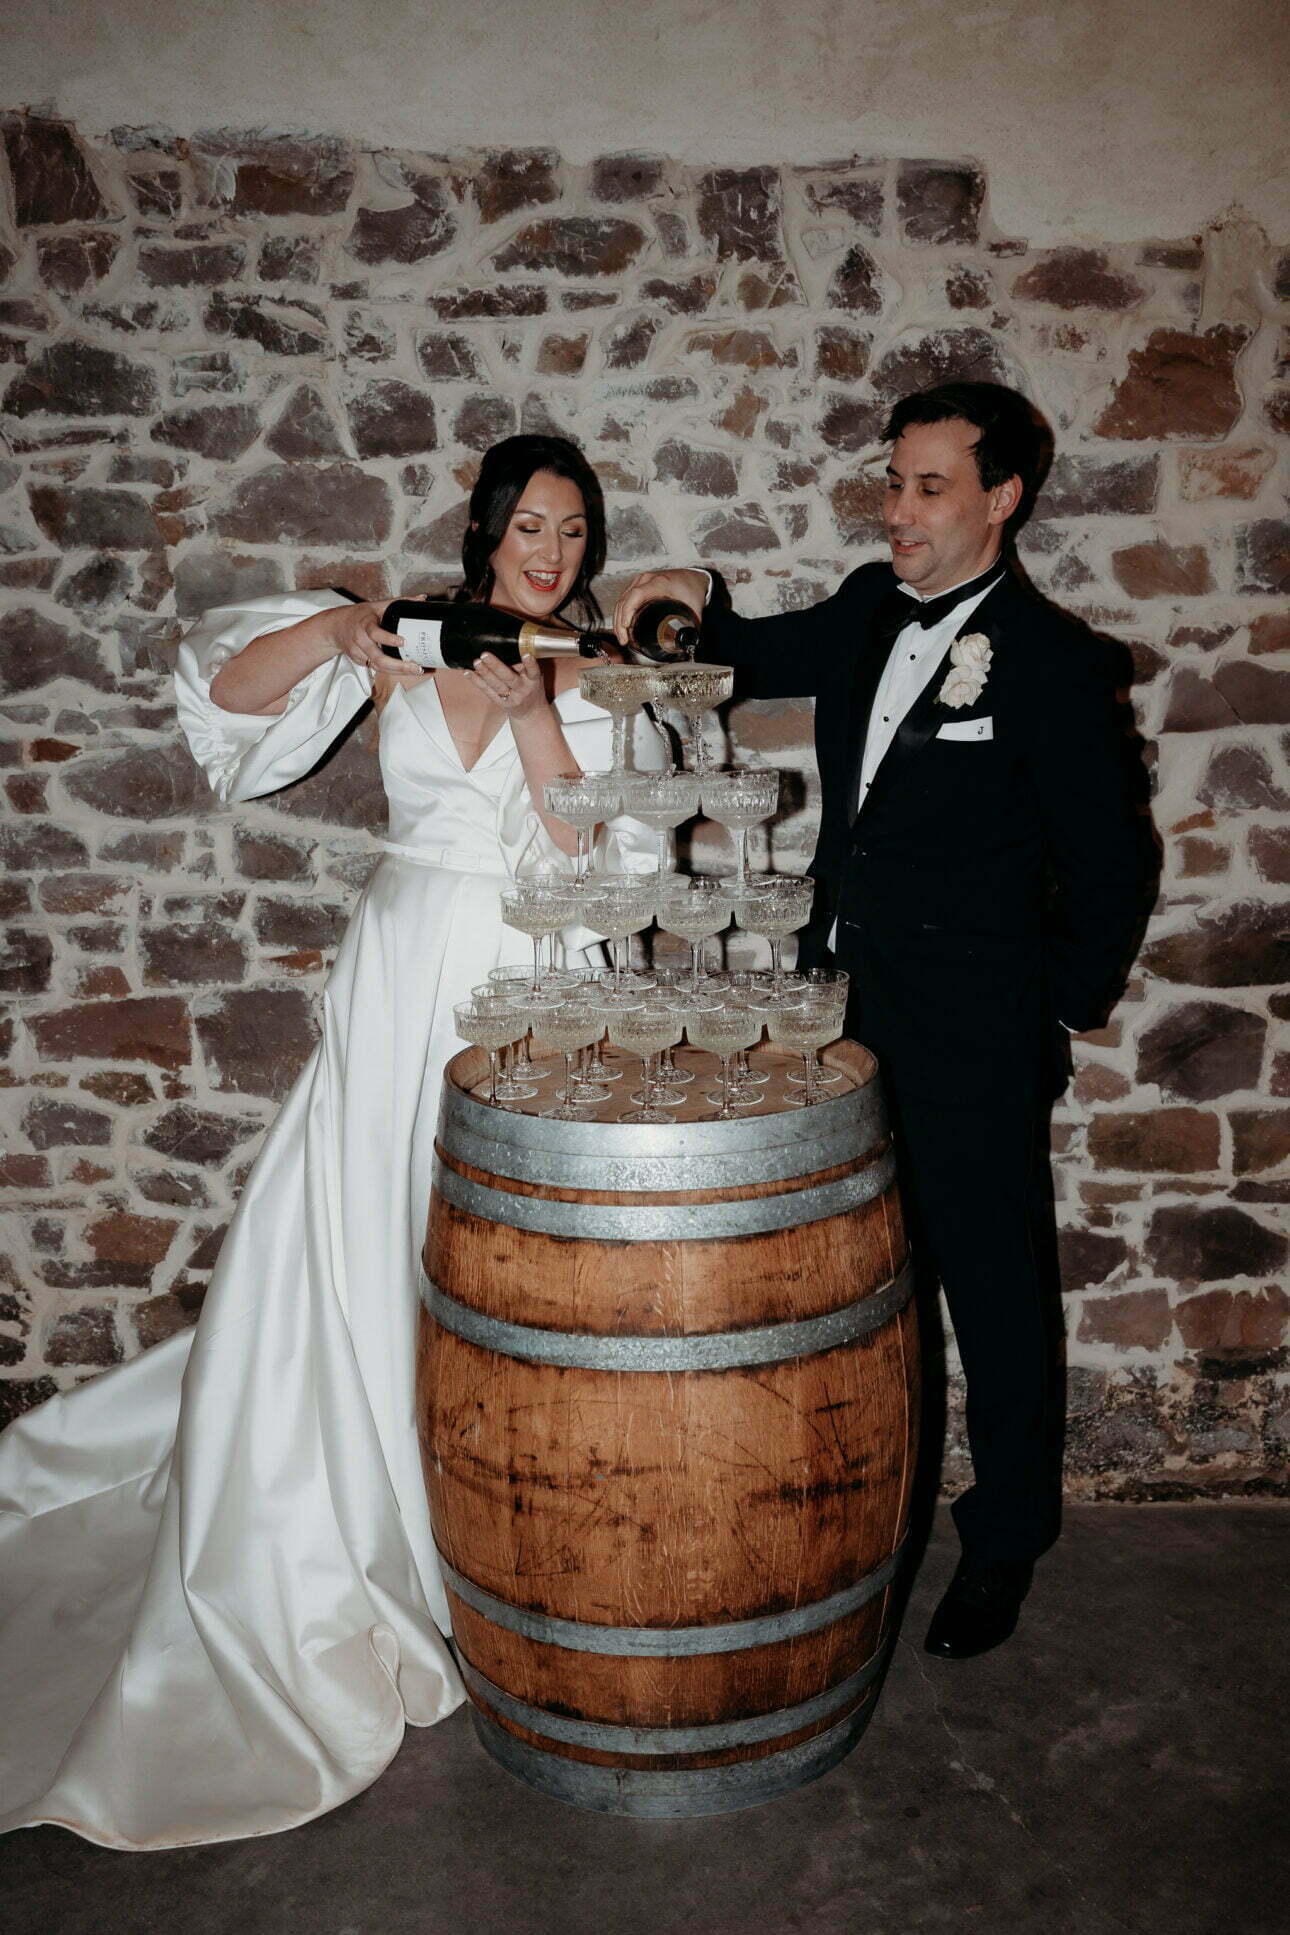 A top tip for a perfect champagne tower wedding photograph is to speak to your photographer to help choose the best place for your champagne tower